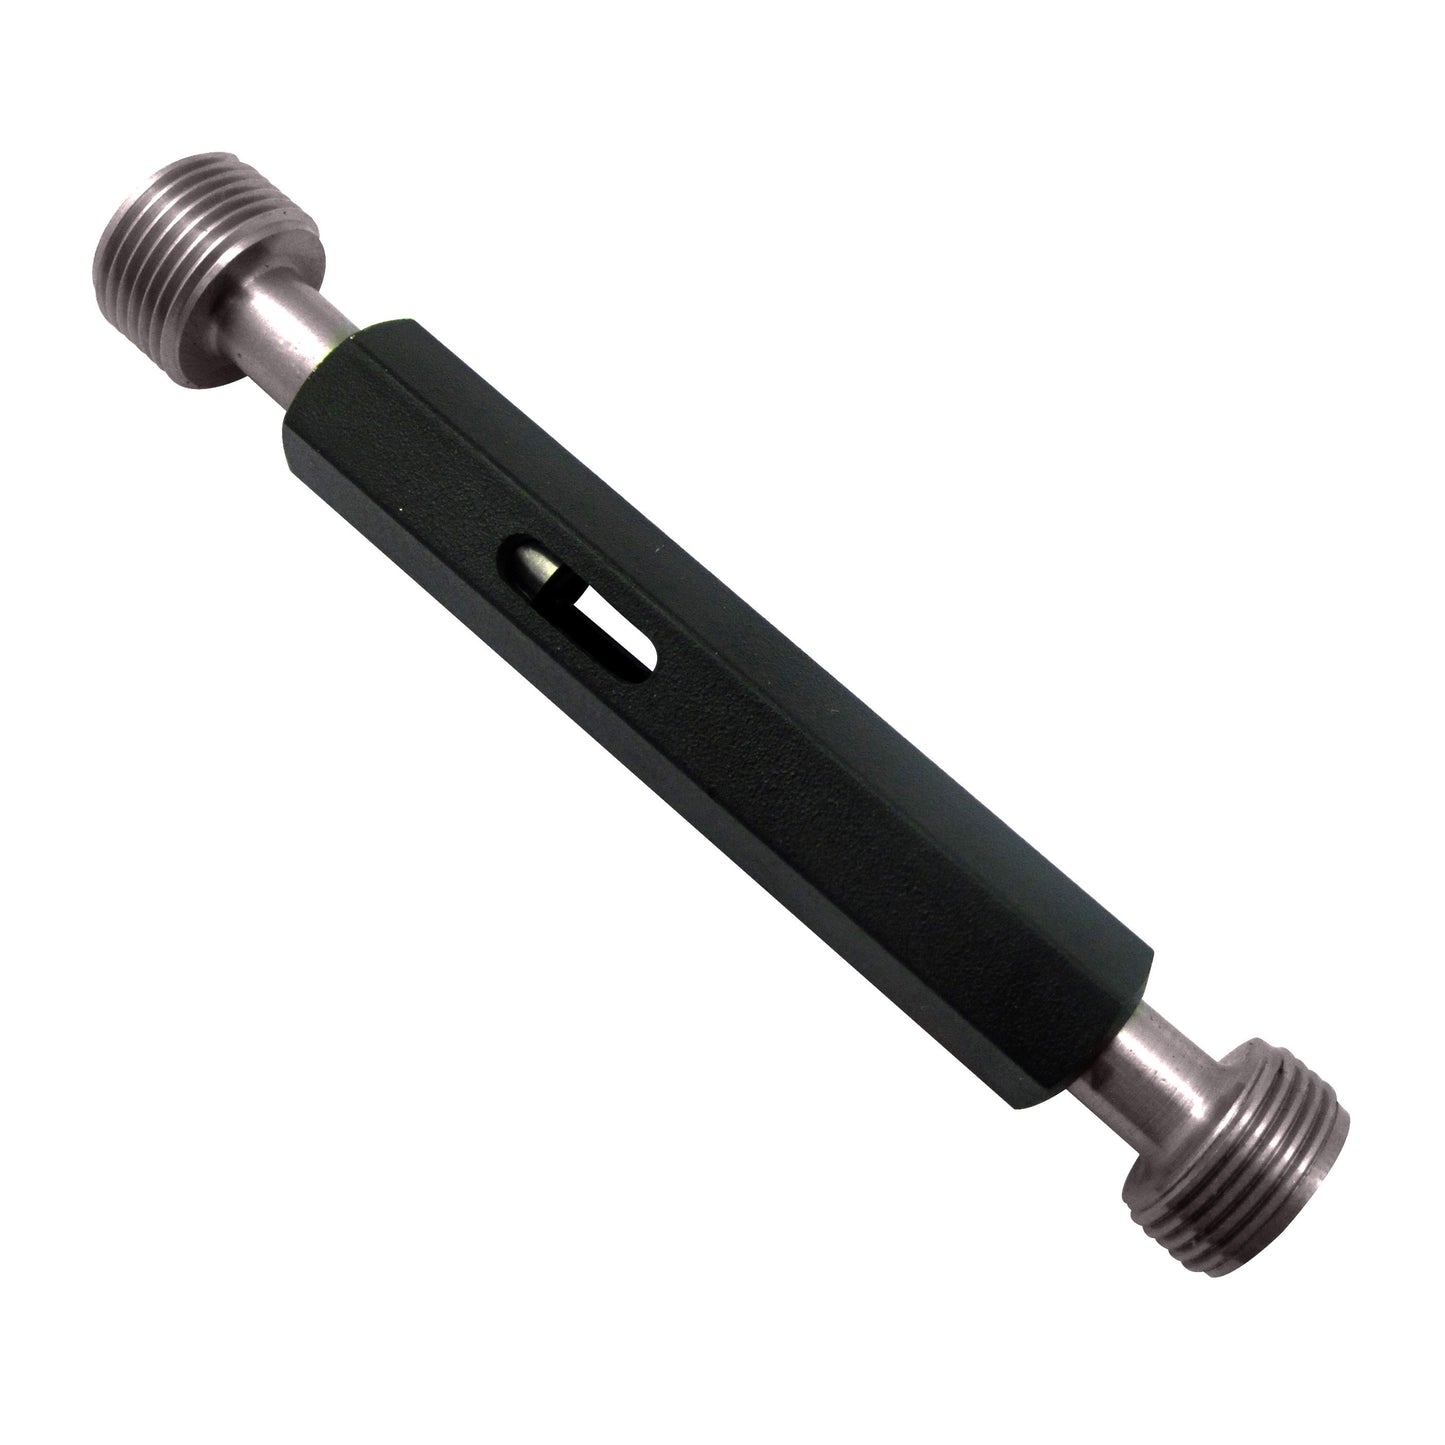 1/2" - 20 Unified Right Hand Thread Plug Gauge